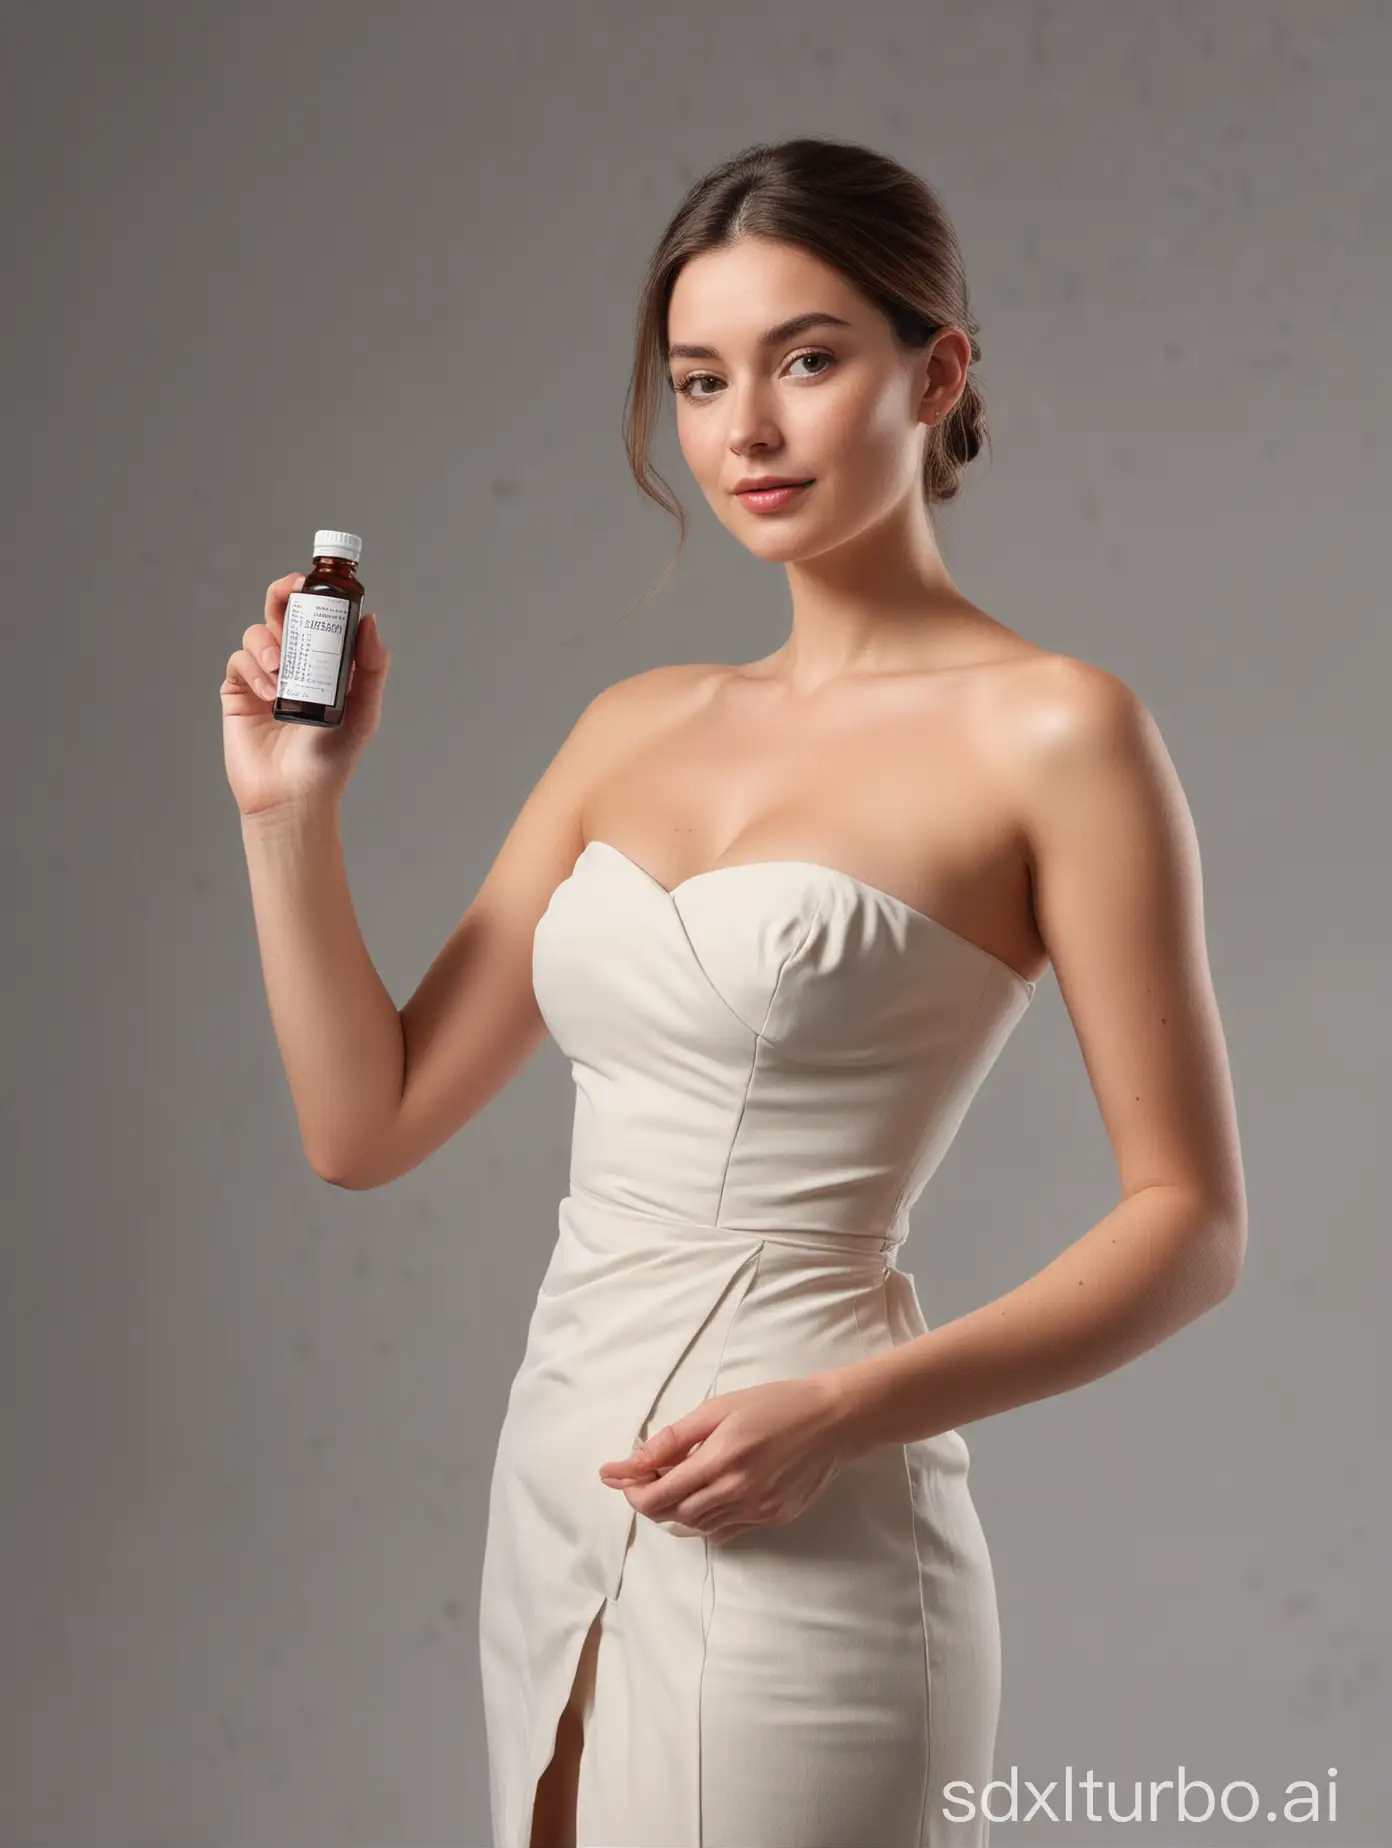 Confident-Woman-Presenting-Healthcare-Product-in-Strapless-Dress